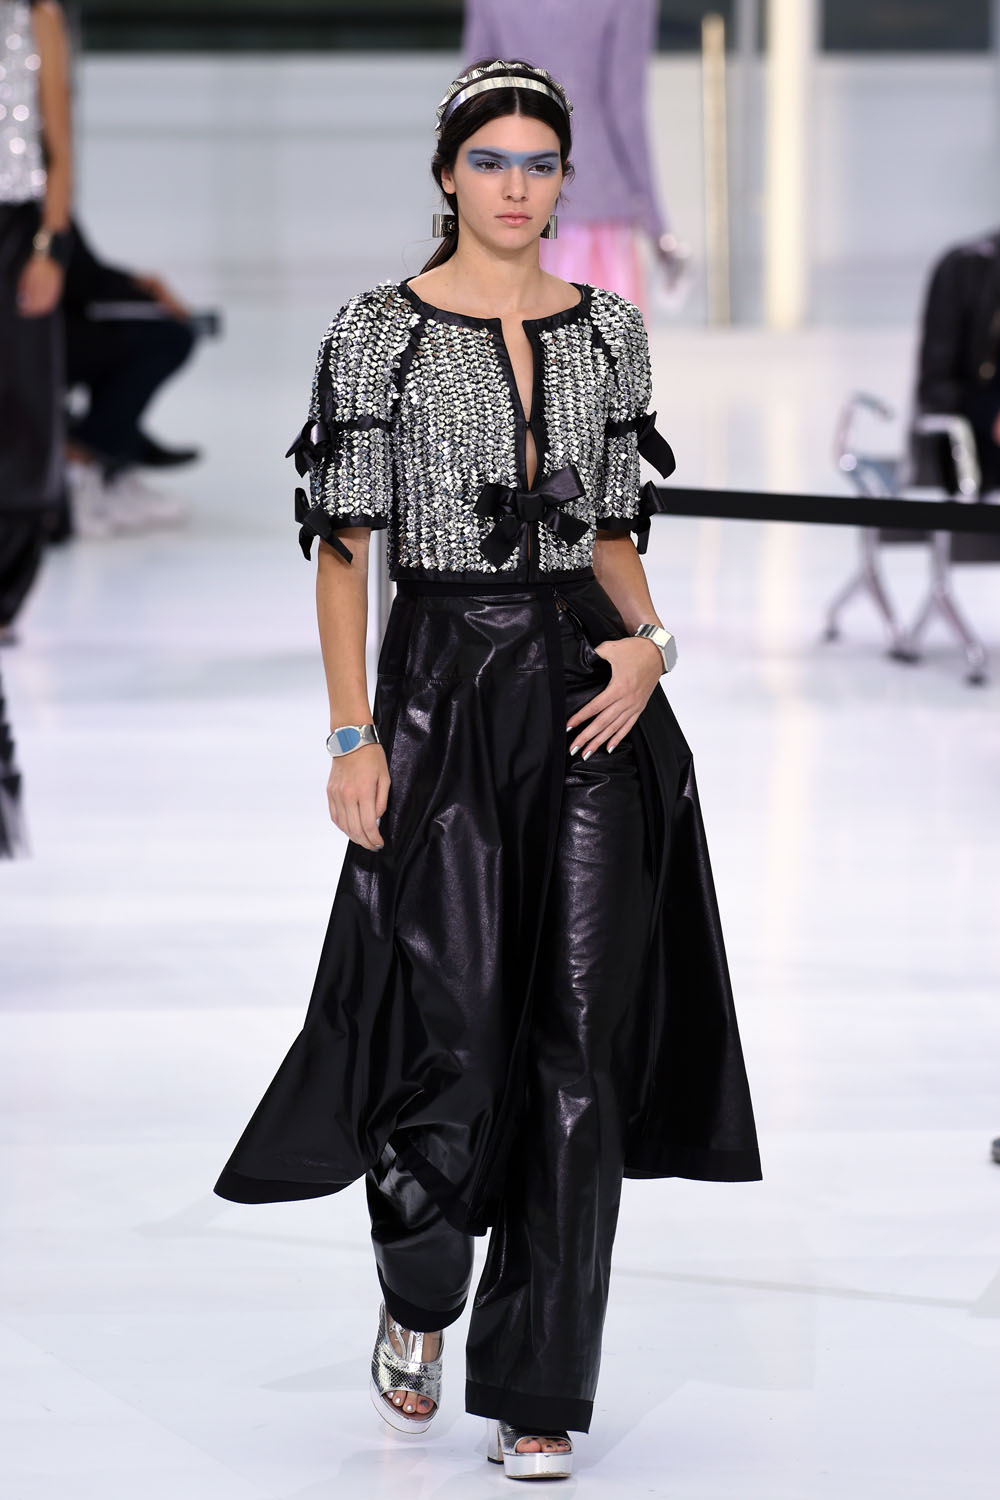 Chanel SS16 Fashion Show And Spring 2016 Collection Pictures | Marie Claire  UK